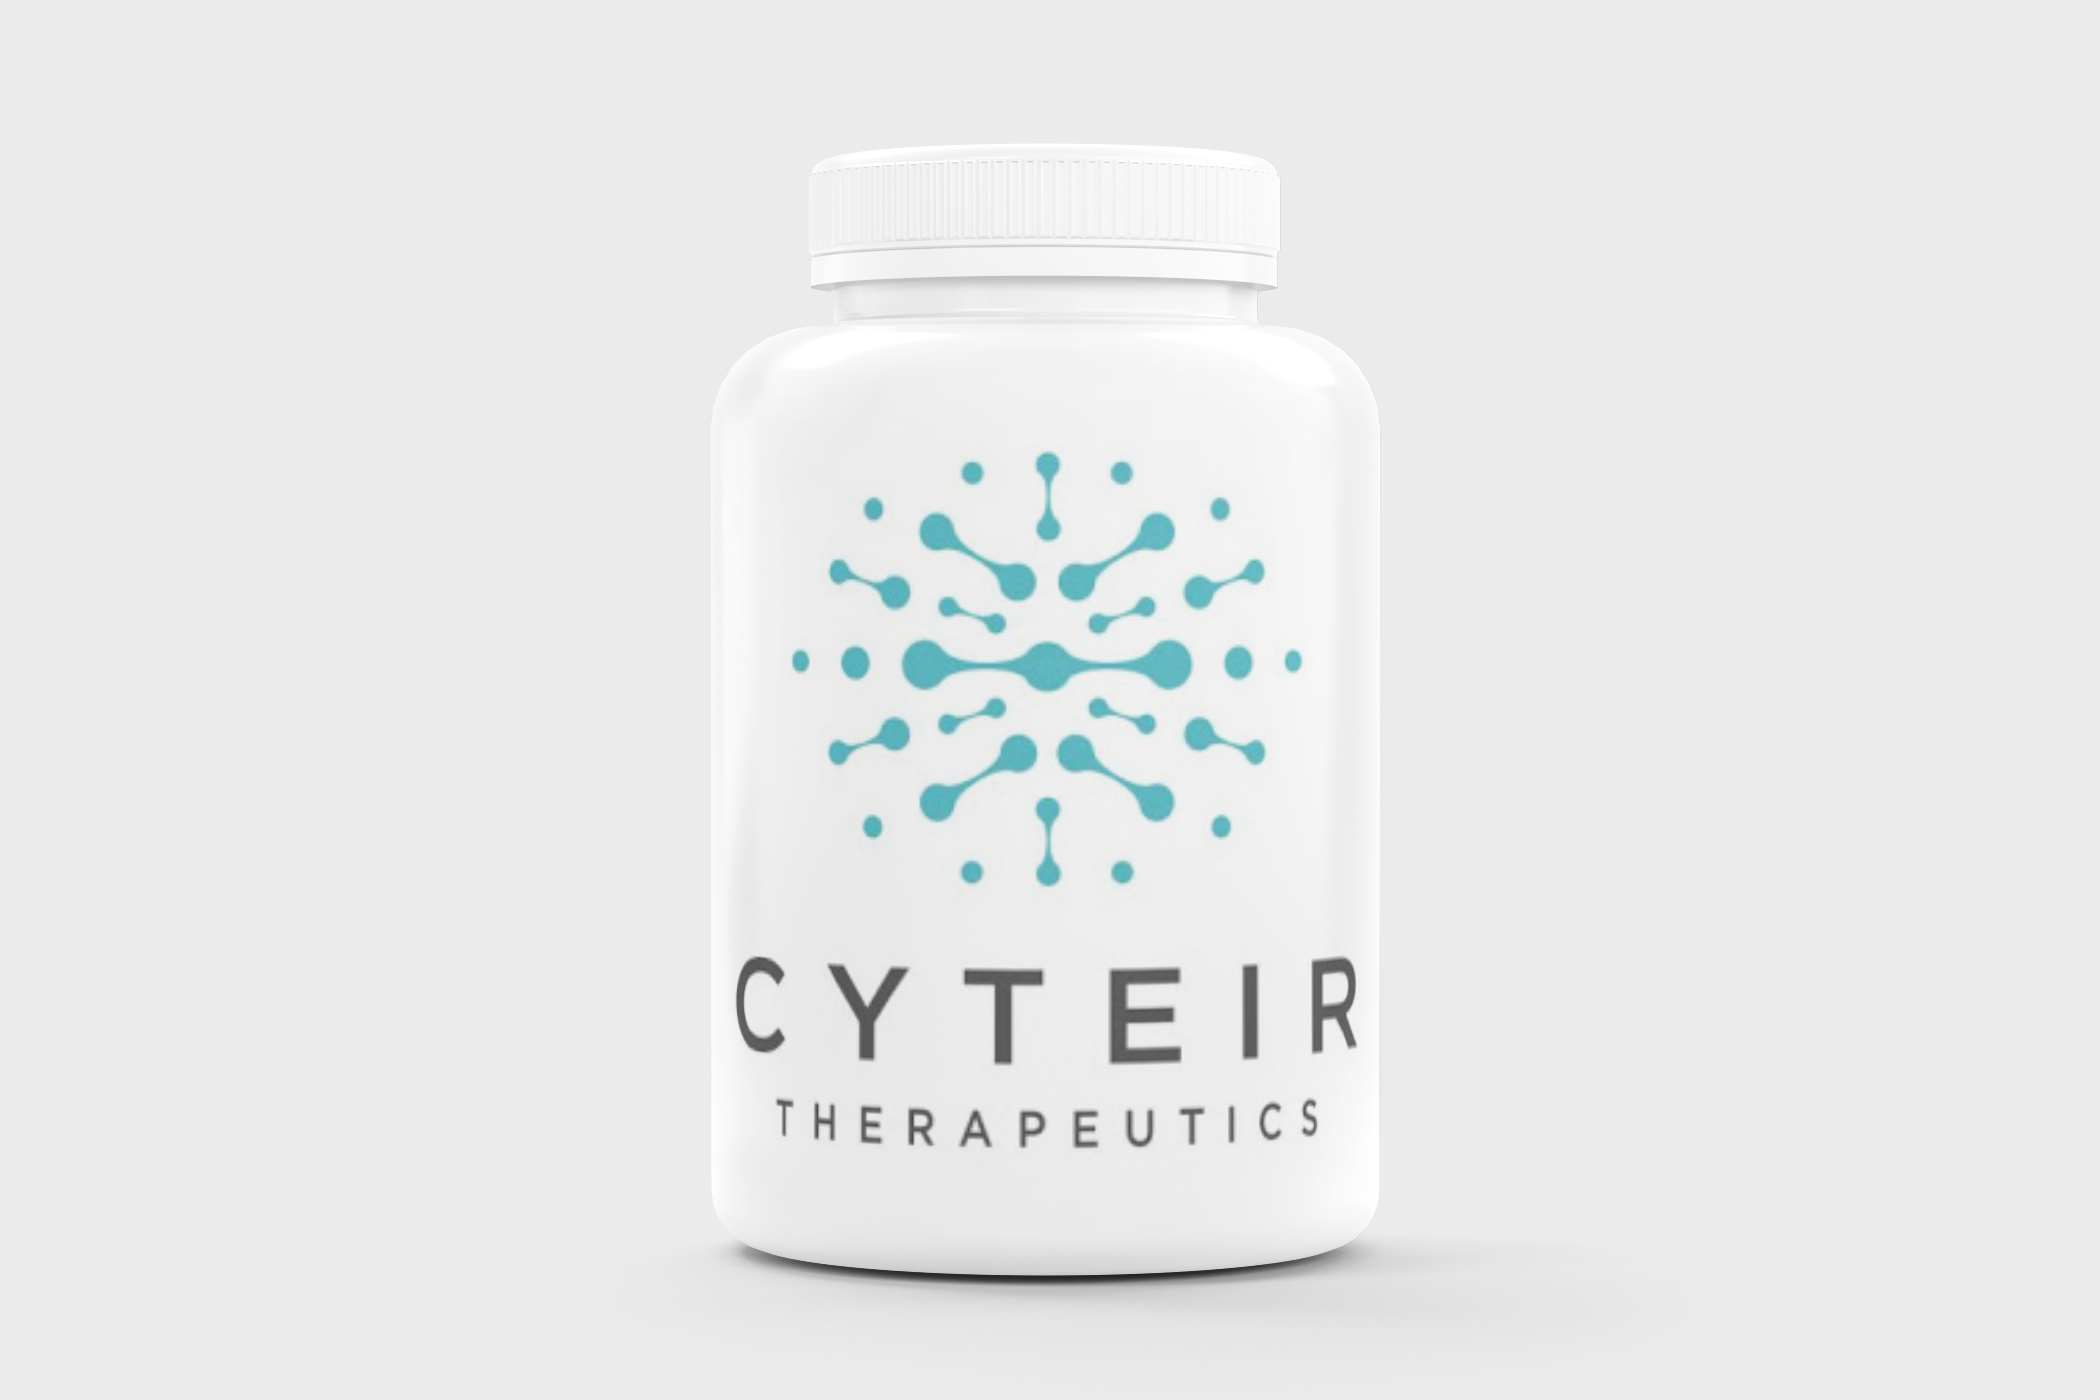 Cyteir Therapeutics Initial Public Offering